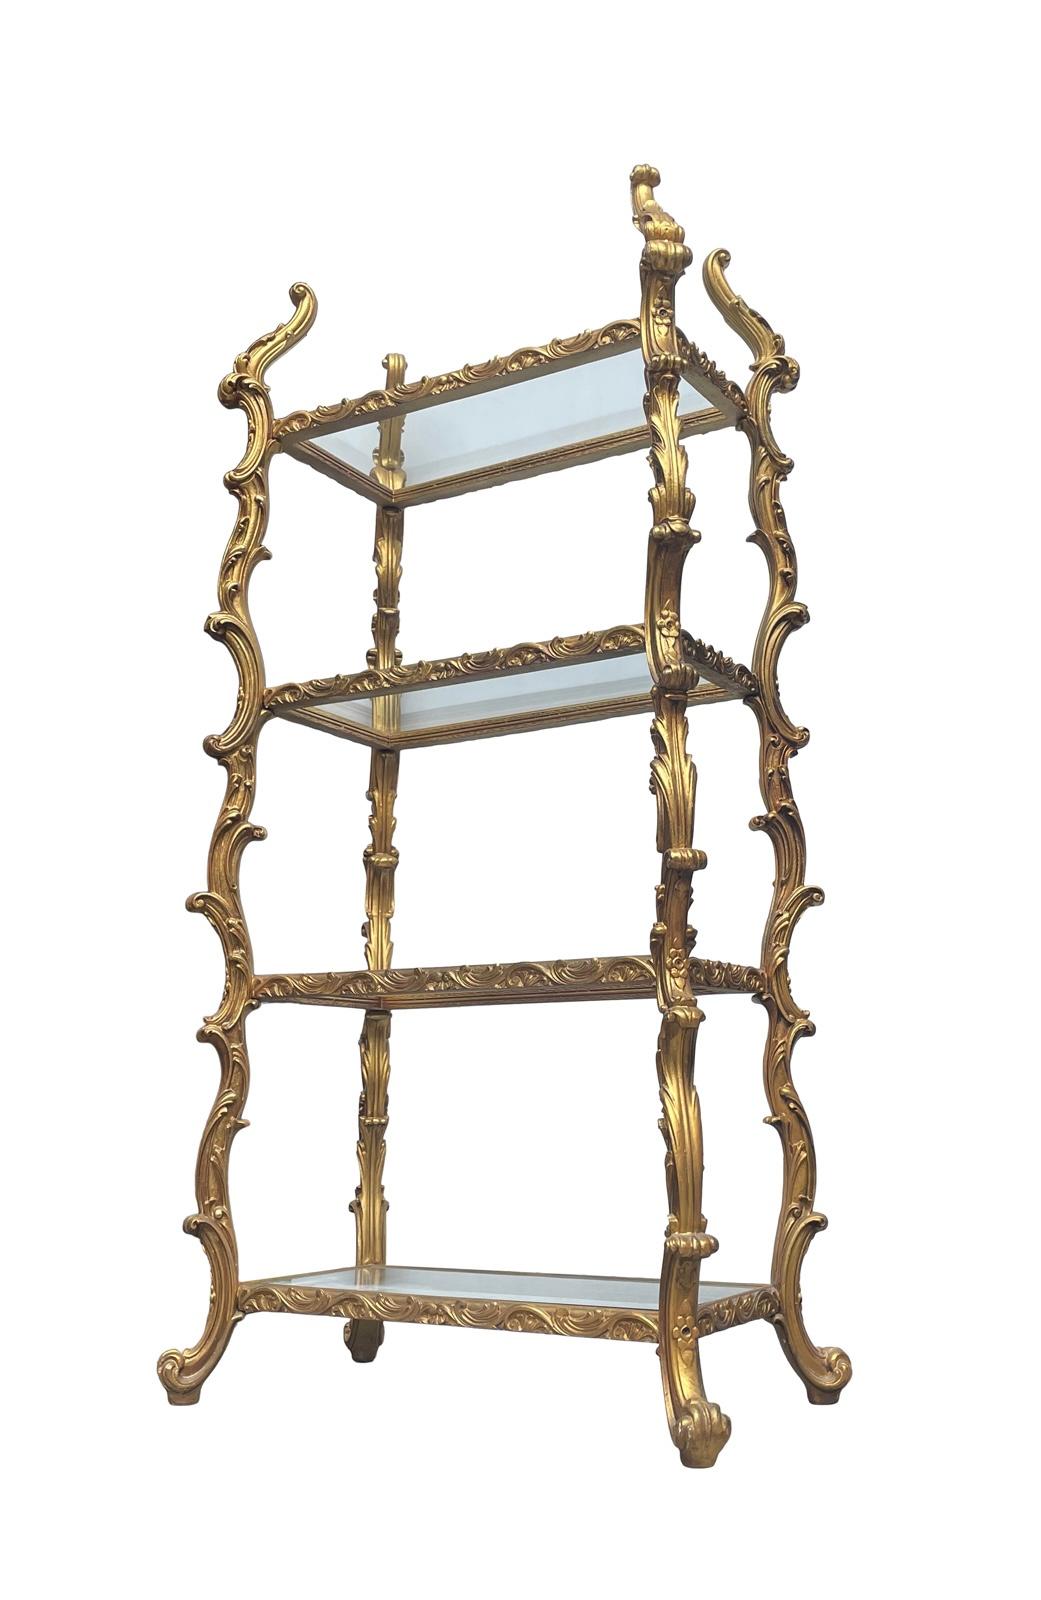 Stunning rococo style Etagere with glass shelves in the manner of Louis Philippe 